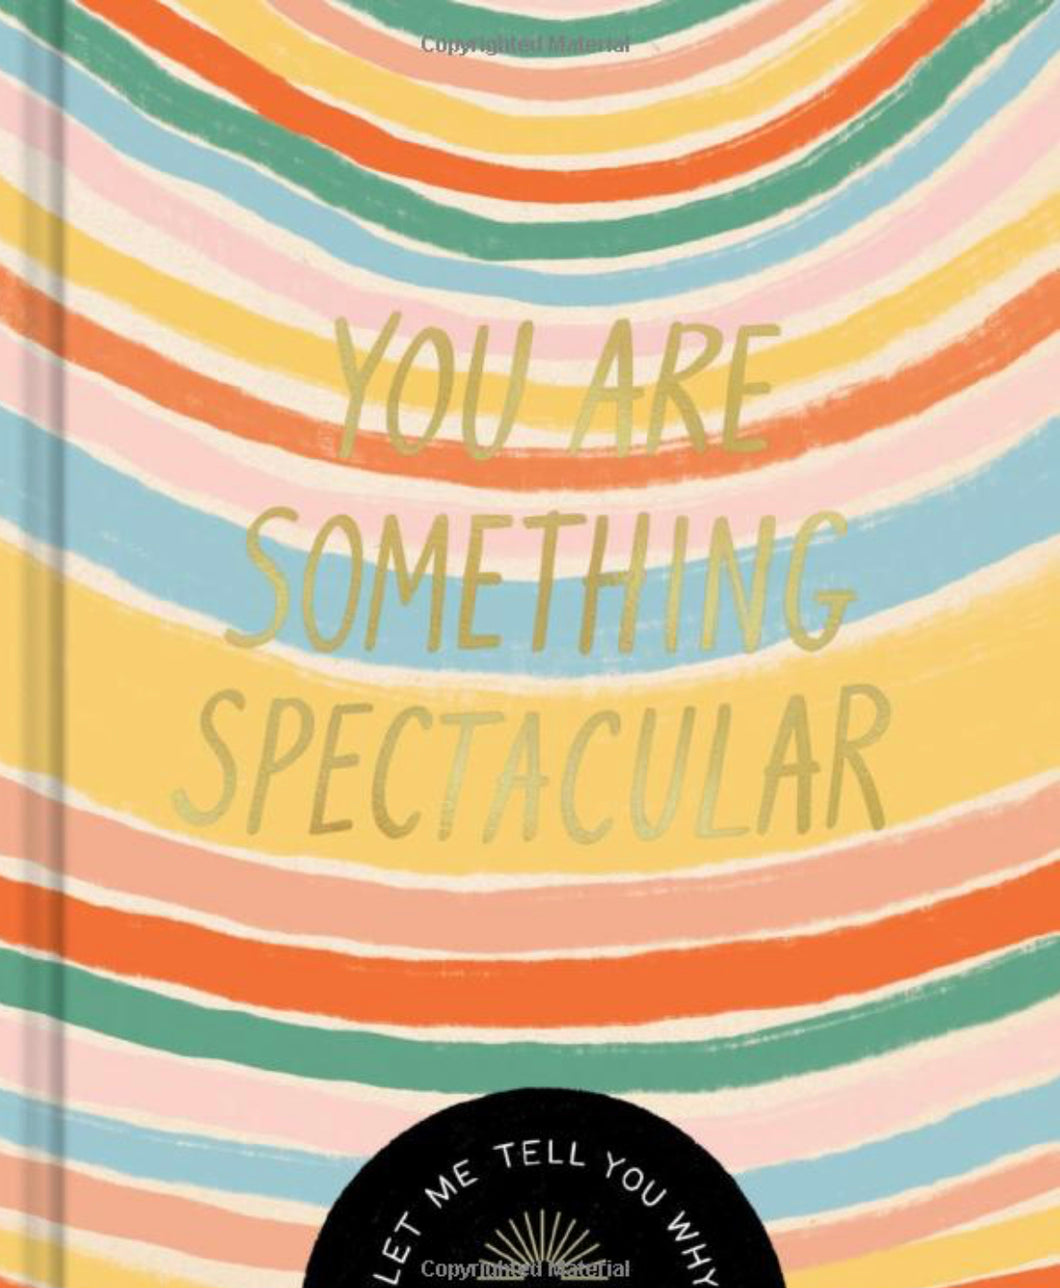 You are Something Spectacular